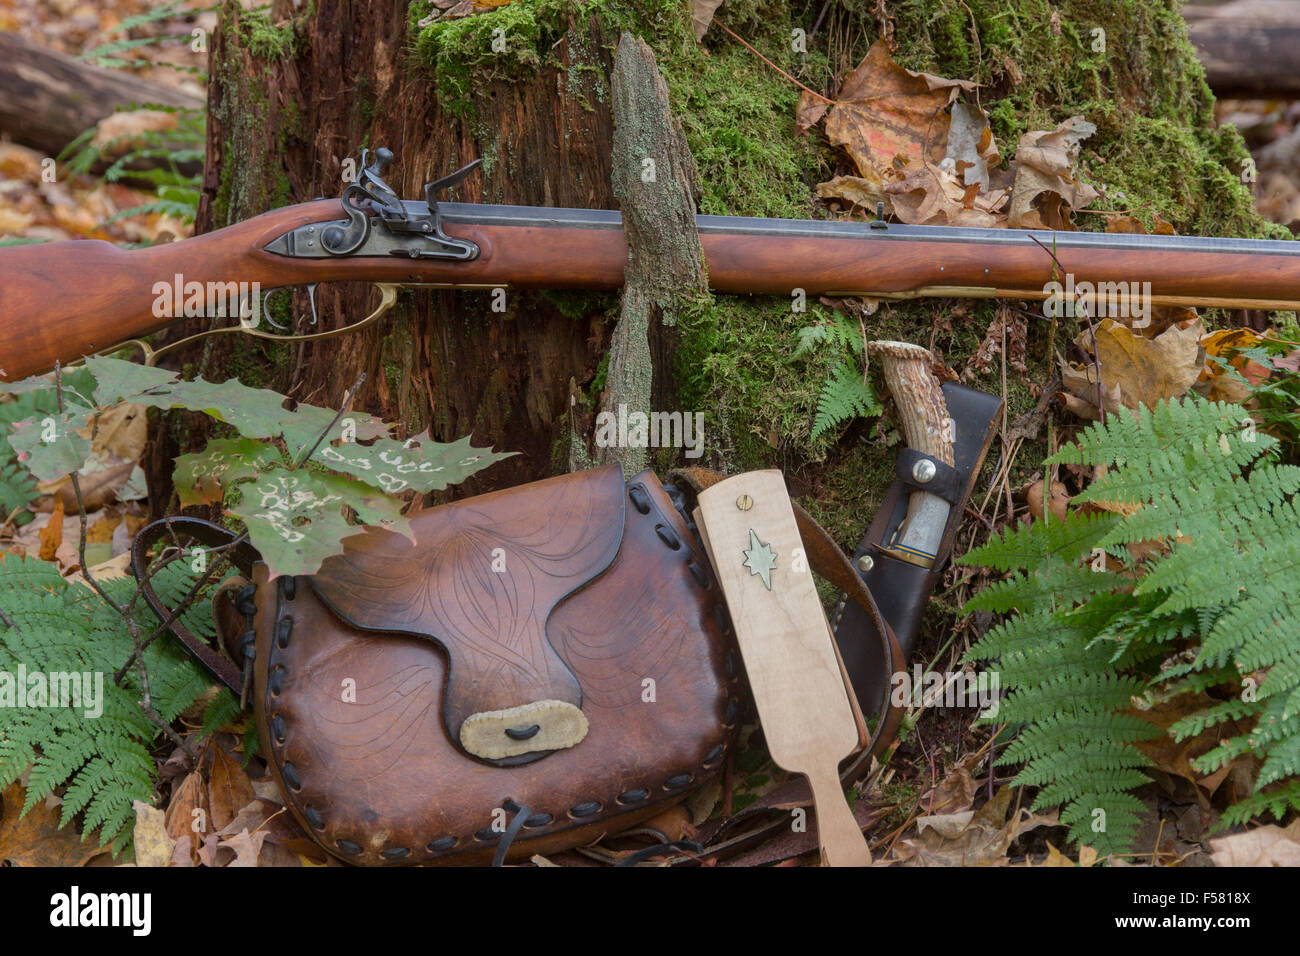 A traditional flintlock rifle and accessories in the autumn woods